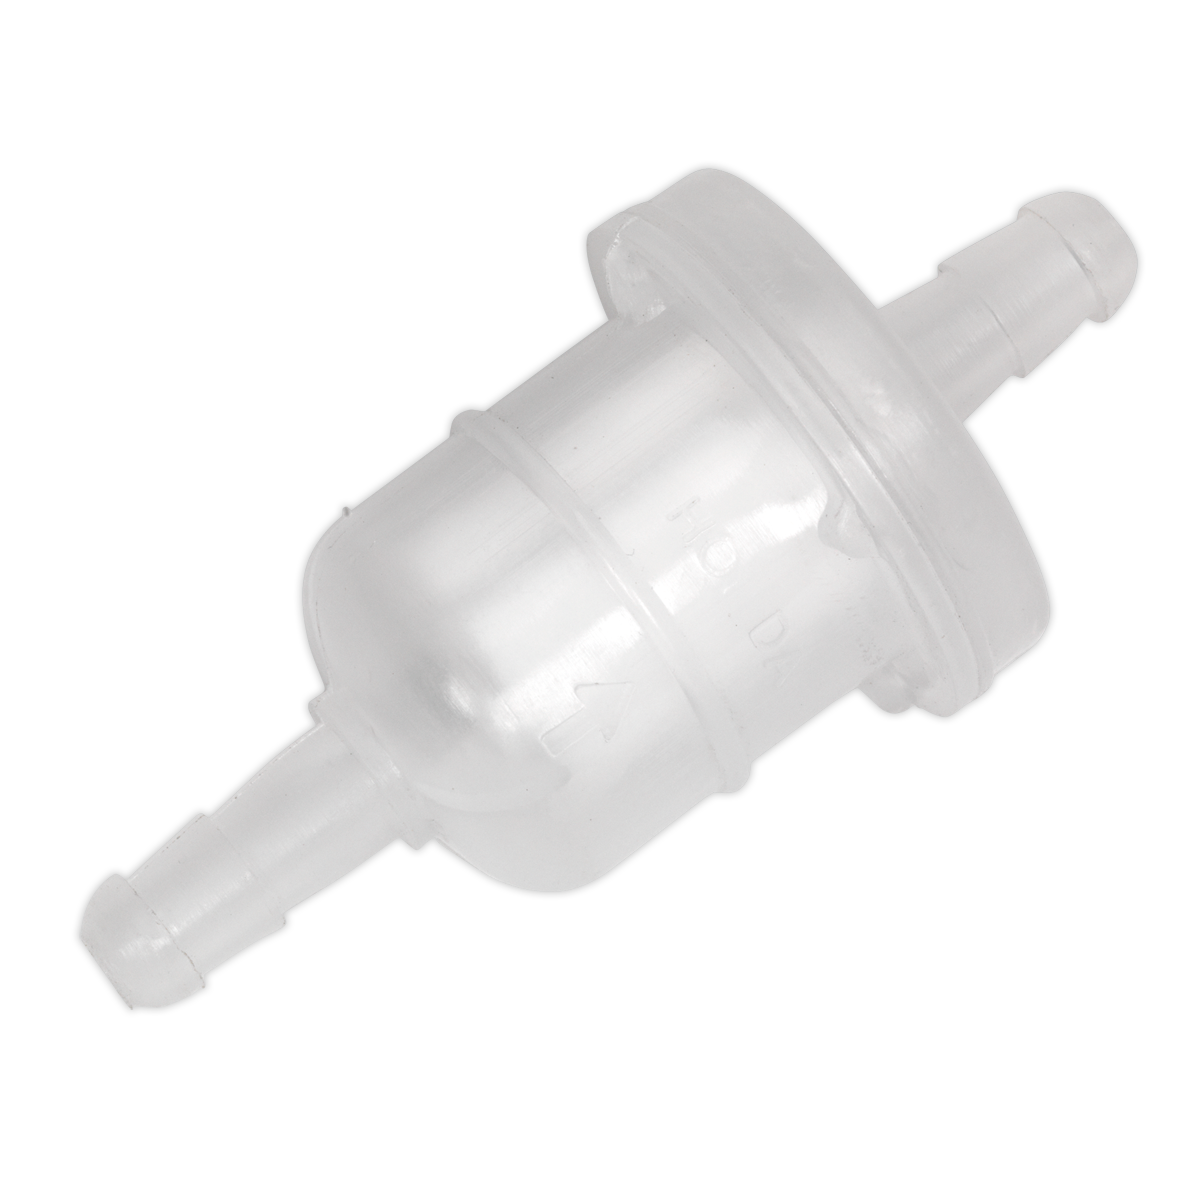 In-Line Fuel Filter Small Pack of 10 - ILFS10 - Farming Parts